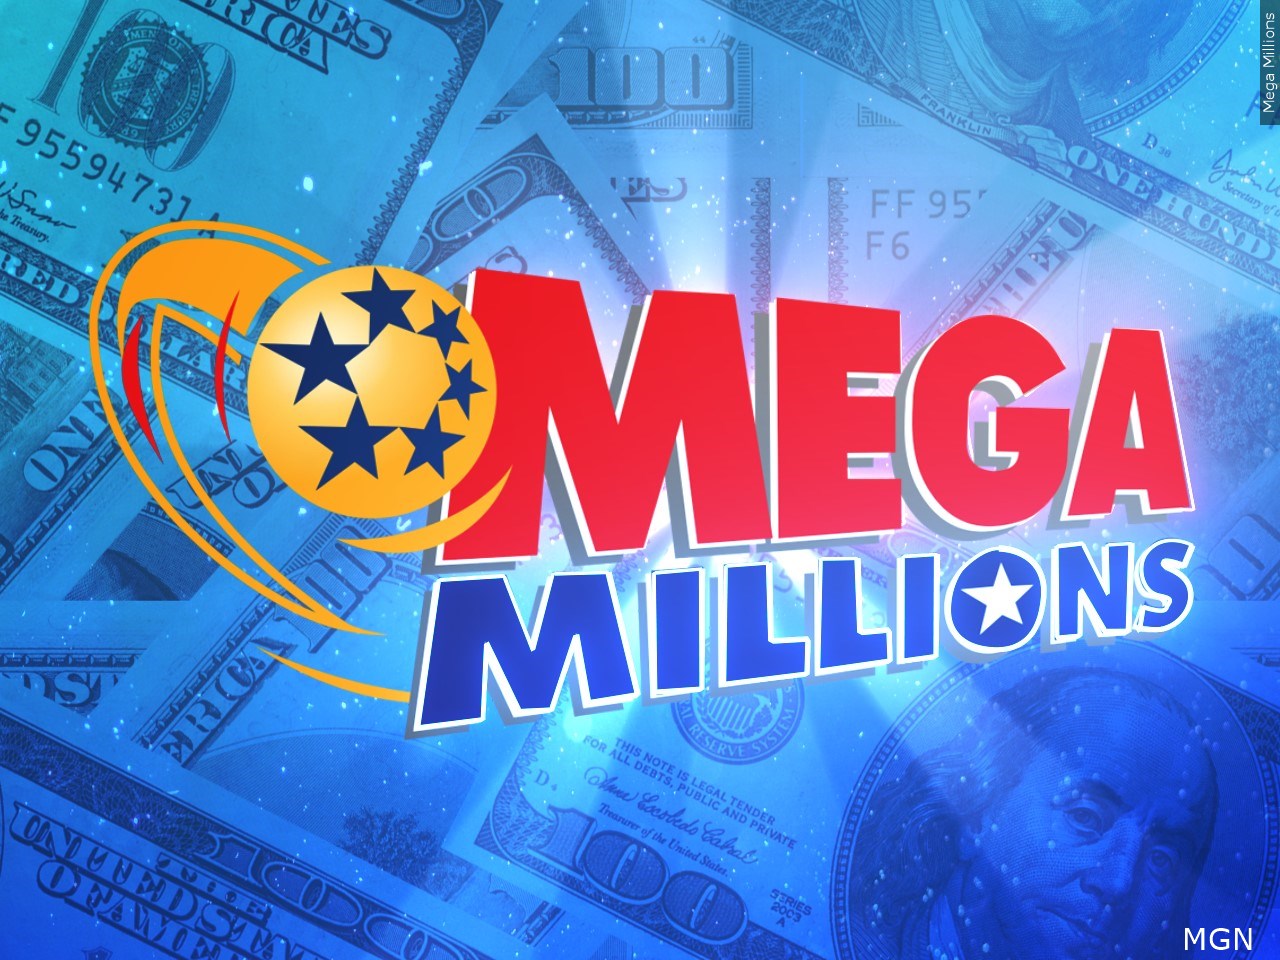 WJHGTV on Twitter "If you were to win the Mega Million Jackpot, what